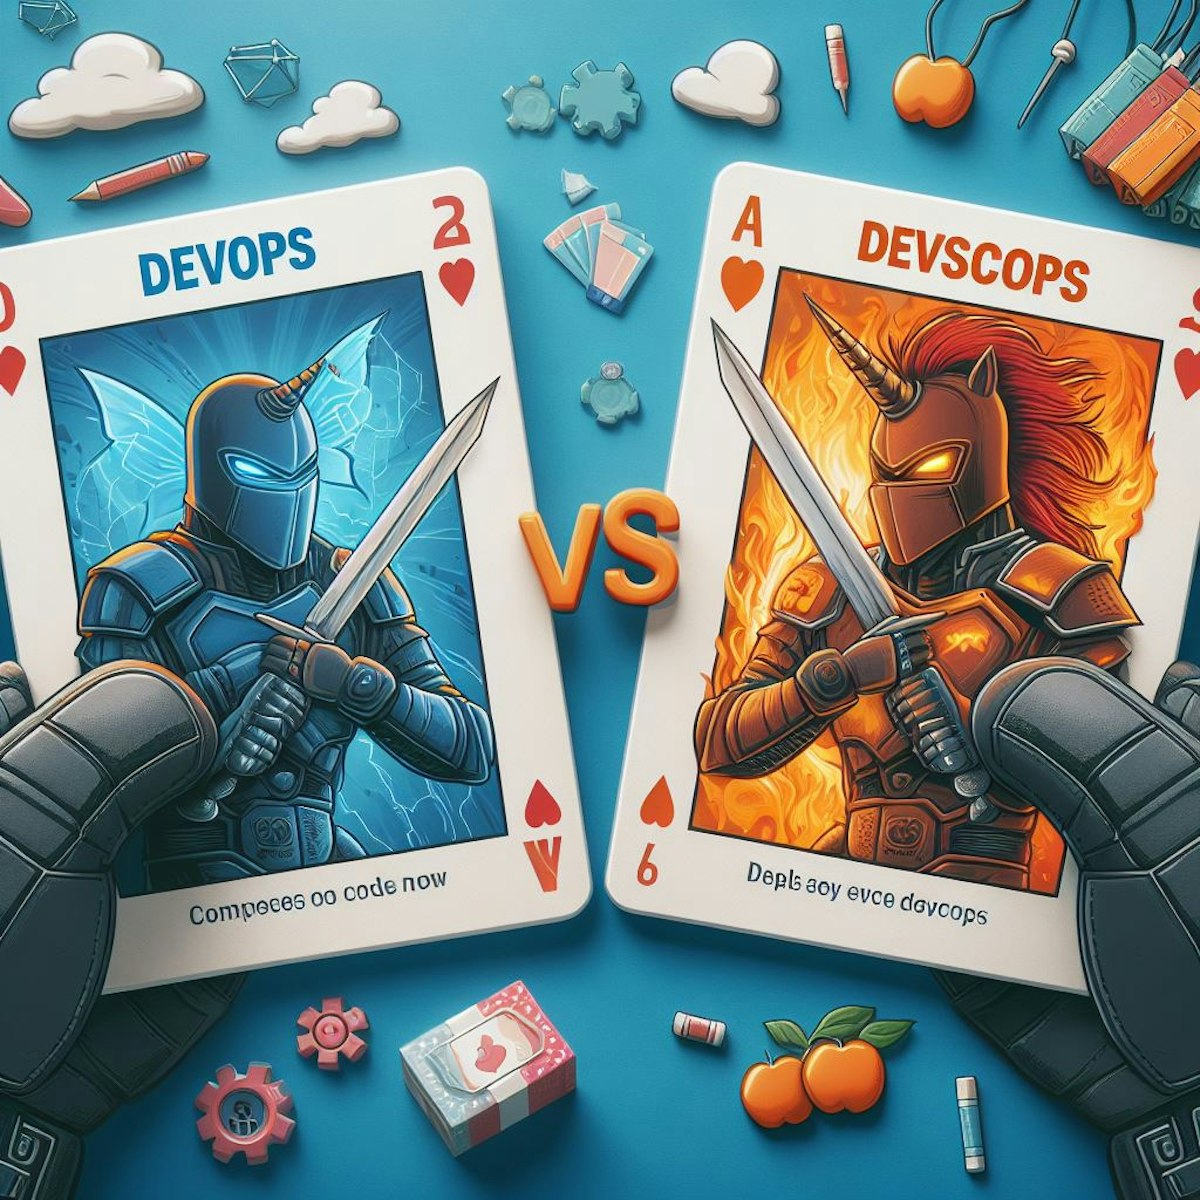 featured image - DevOps vs DevSecOps: Comparing the Two Battle cards